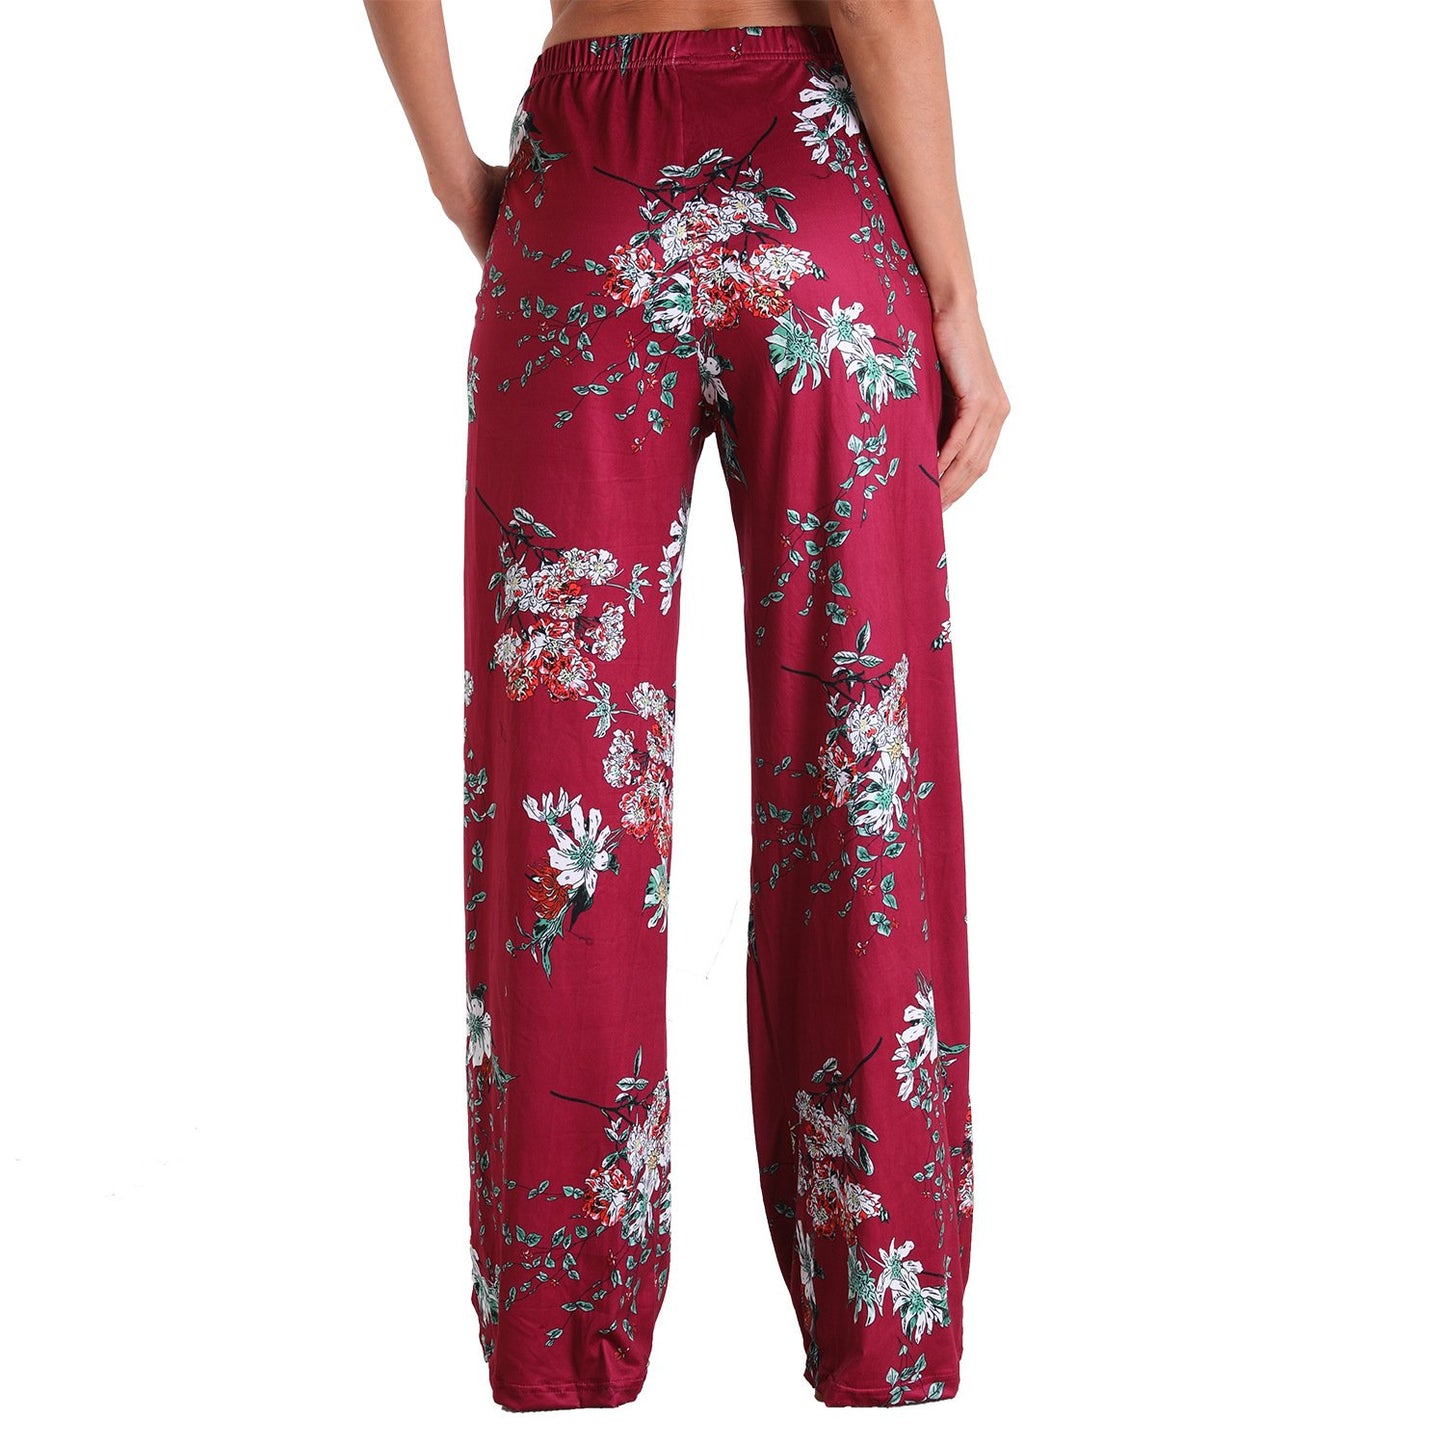 Leisure Women Comfortable Pants with Pocket